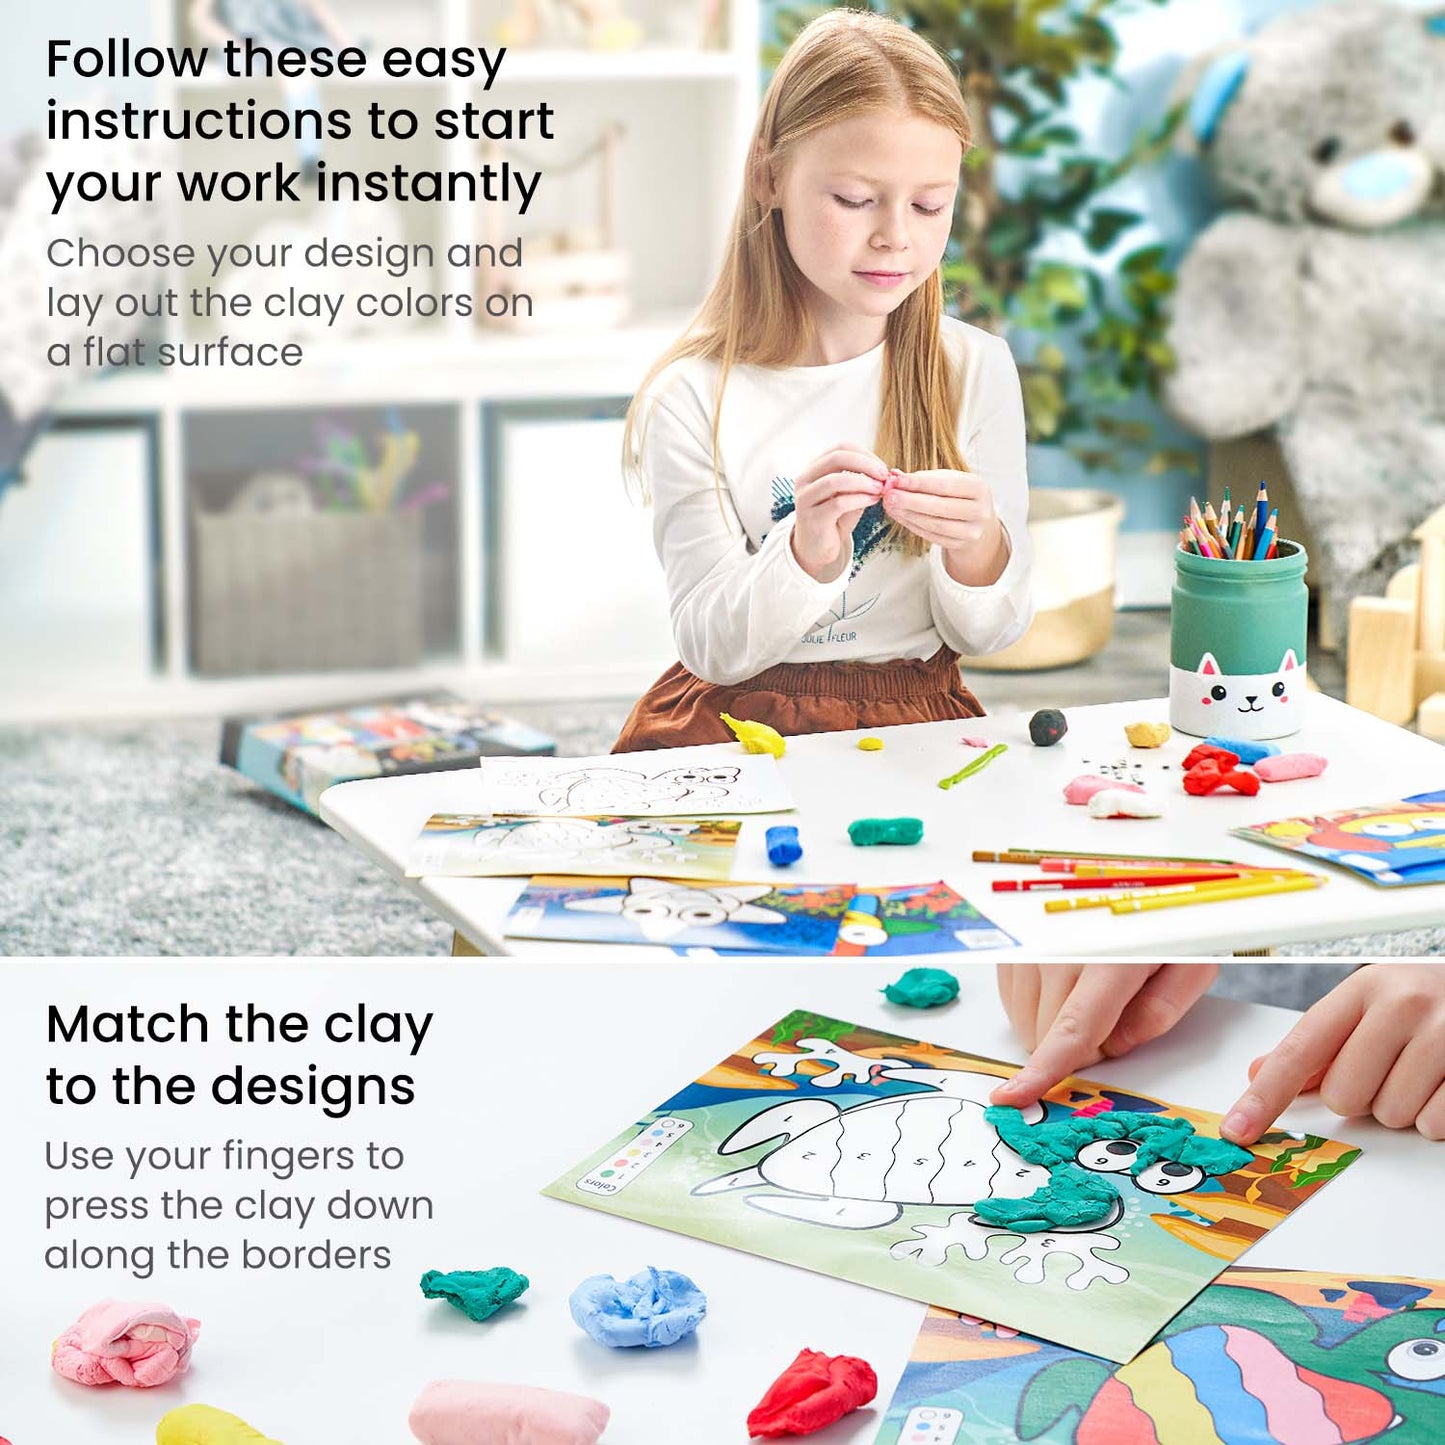 Kids Clay By Numbers Kit, Sea Life